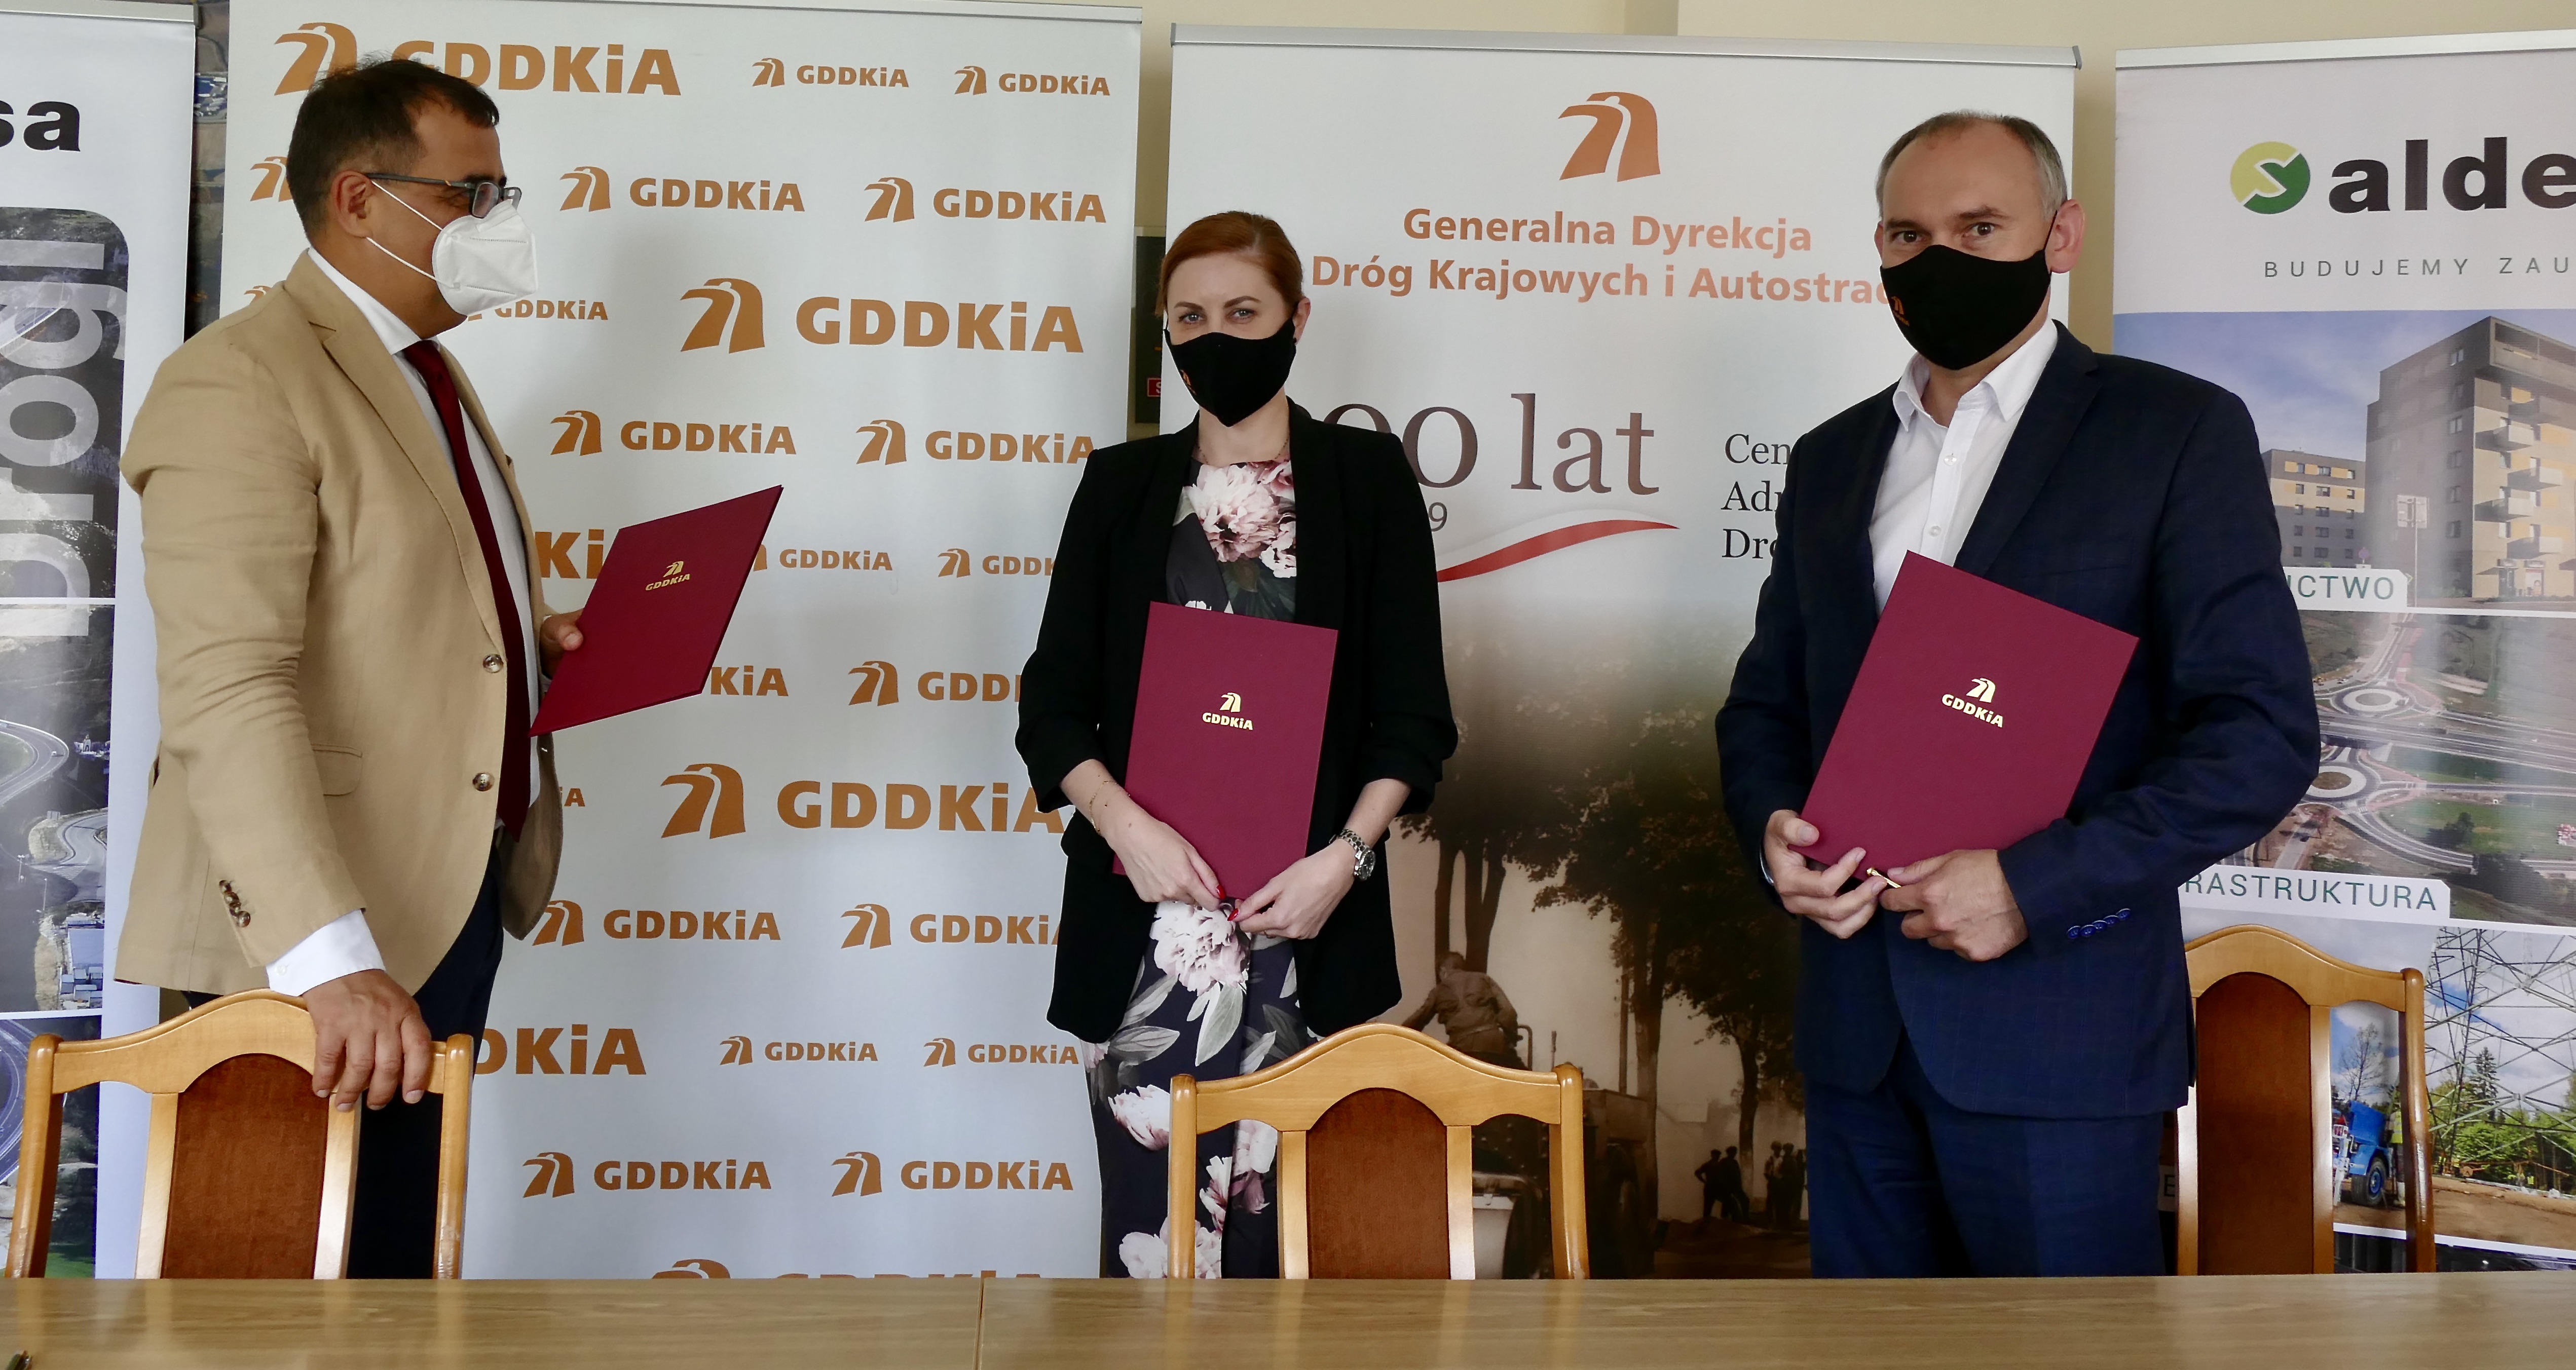 Aldesa - Aldesa signed a contract with GDDKiA for the construction of the S6 expressway between Bobrowniki and Skórów